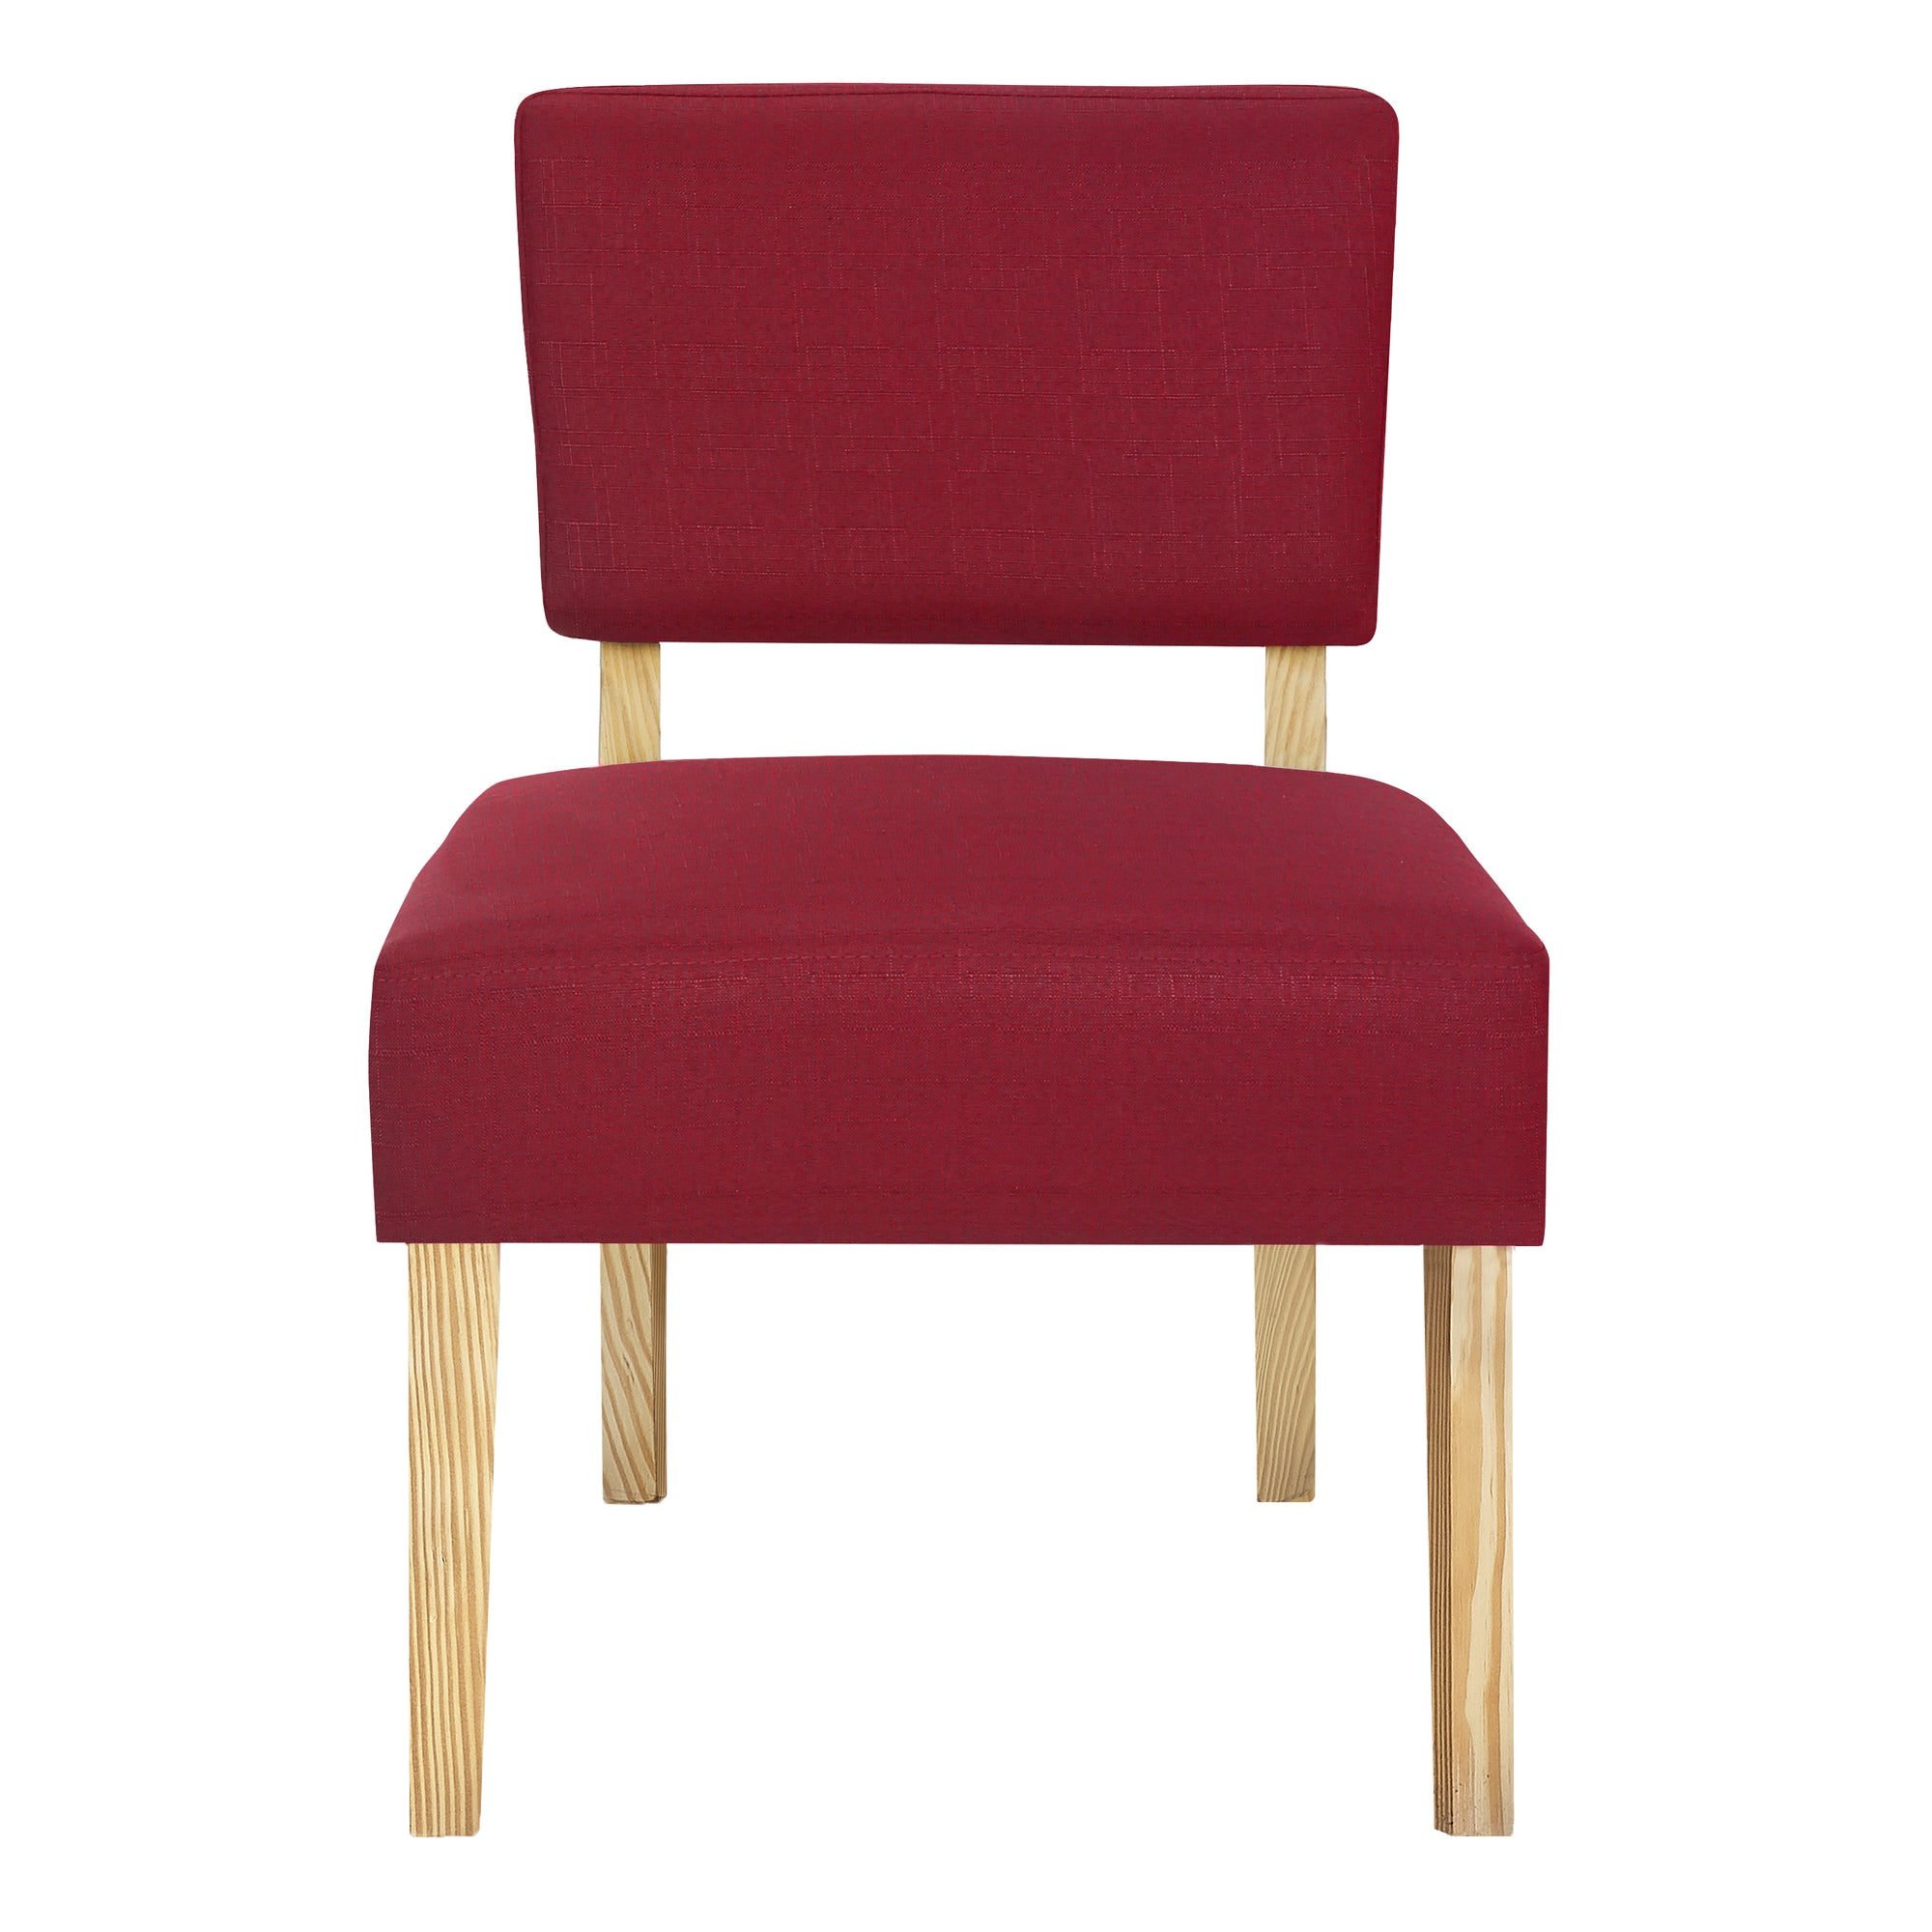 Accent Chair - Red Fabric / Natural Wood Legs